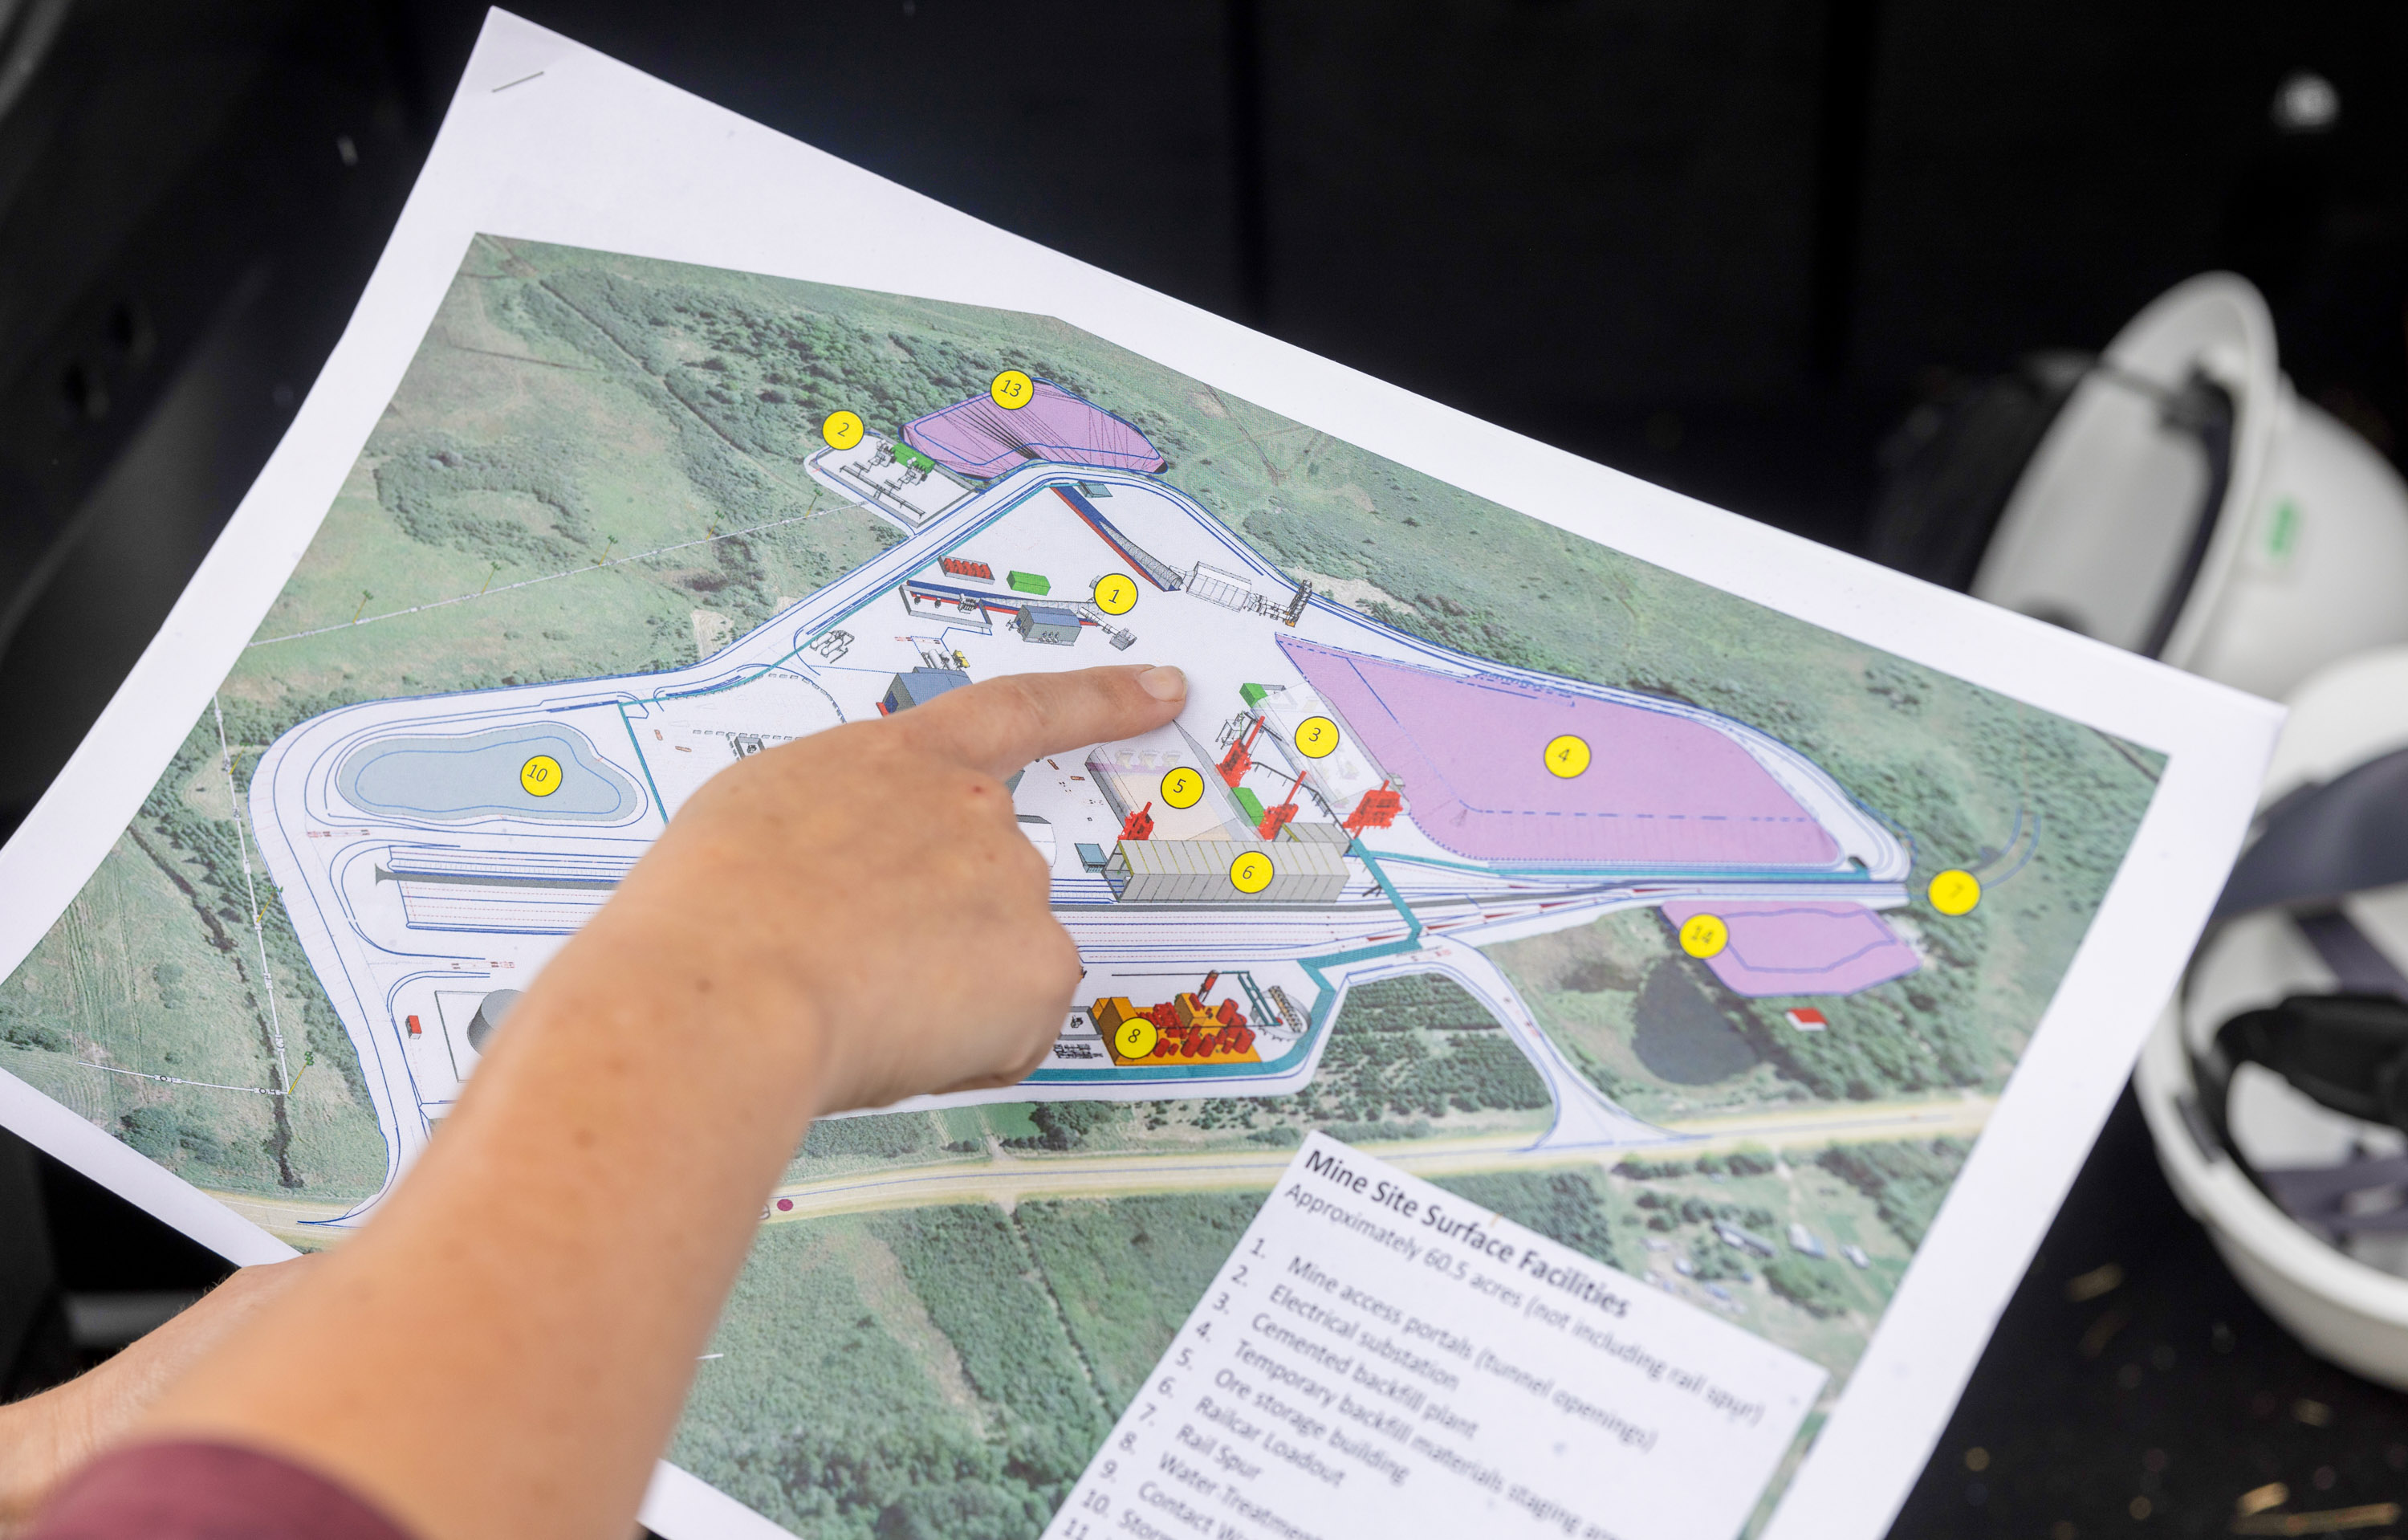 hand pointing to a printed map of the Tamarack site